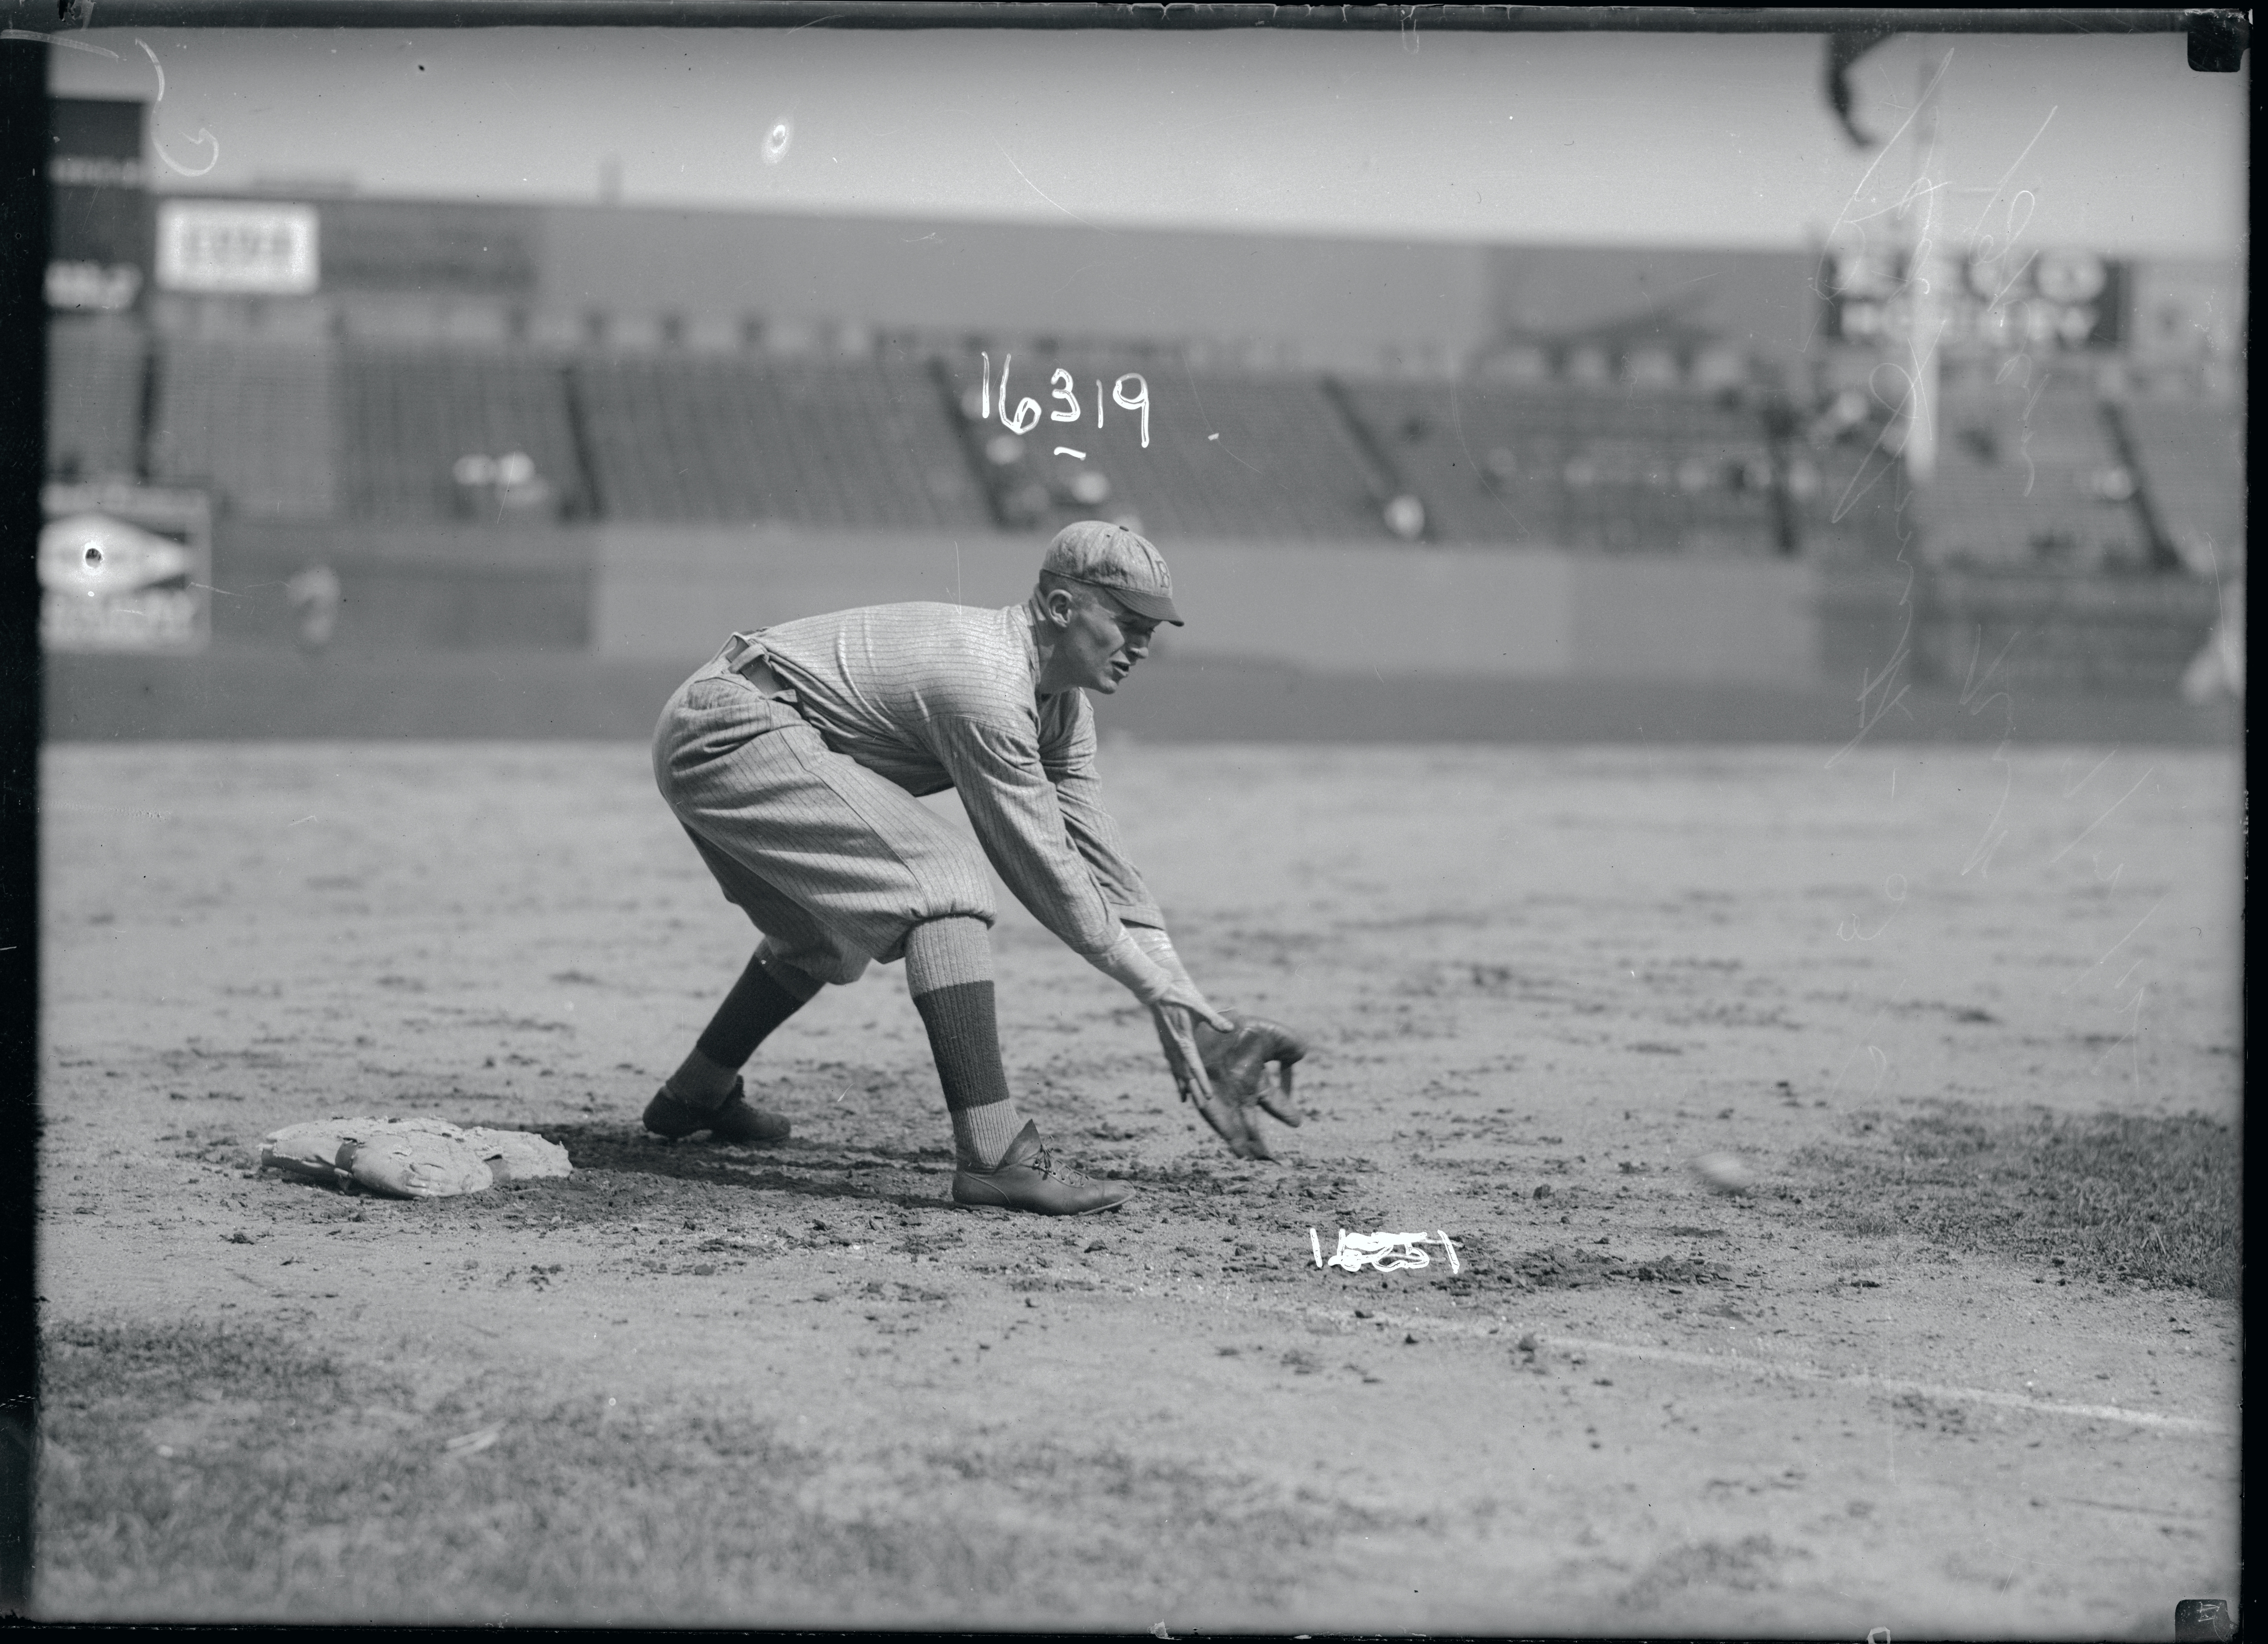 Red Smith was a third baseman who played for the Brooklyn Dodgers and Boston Braves from 1911-1919.